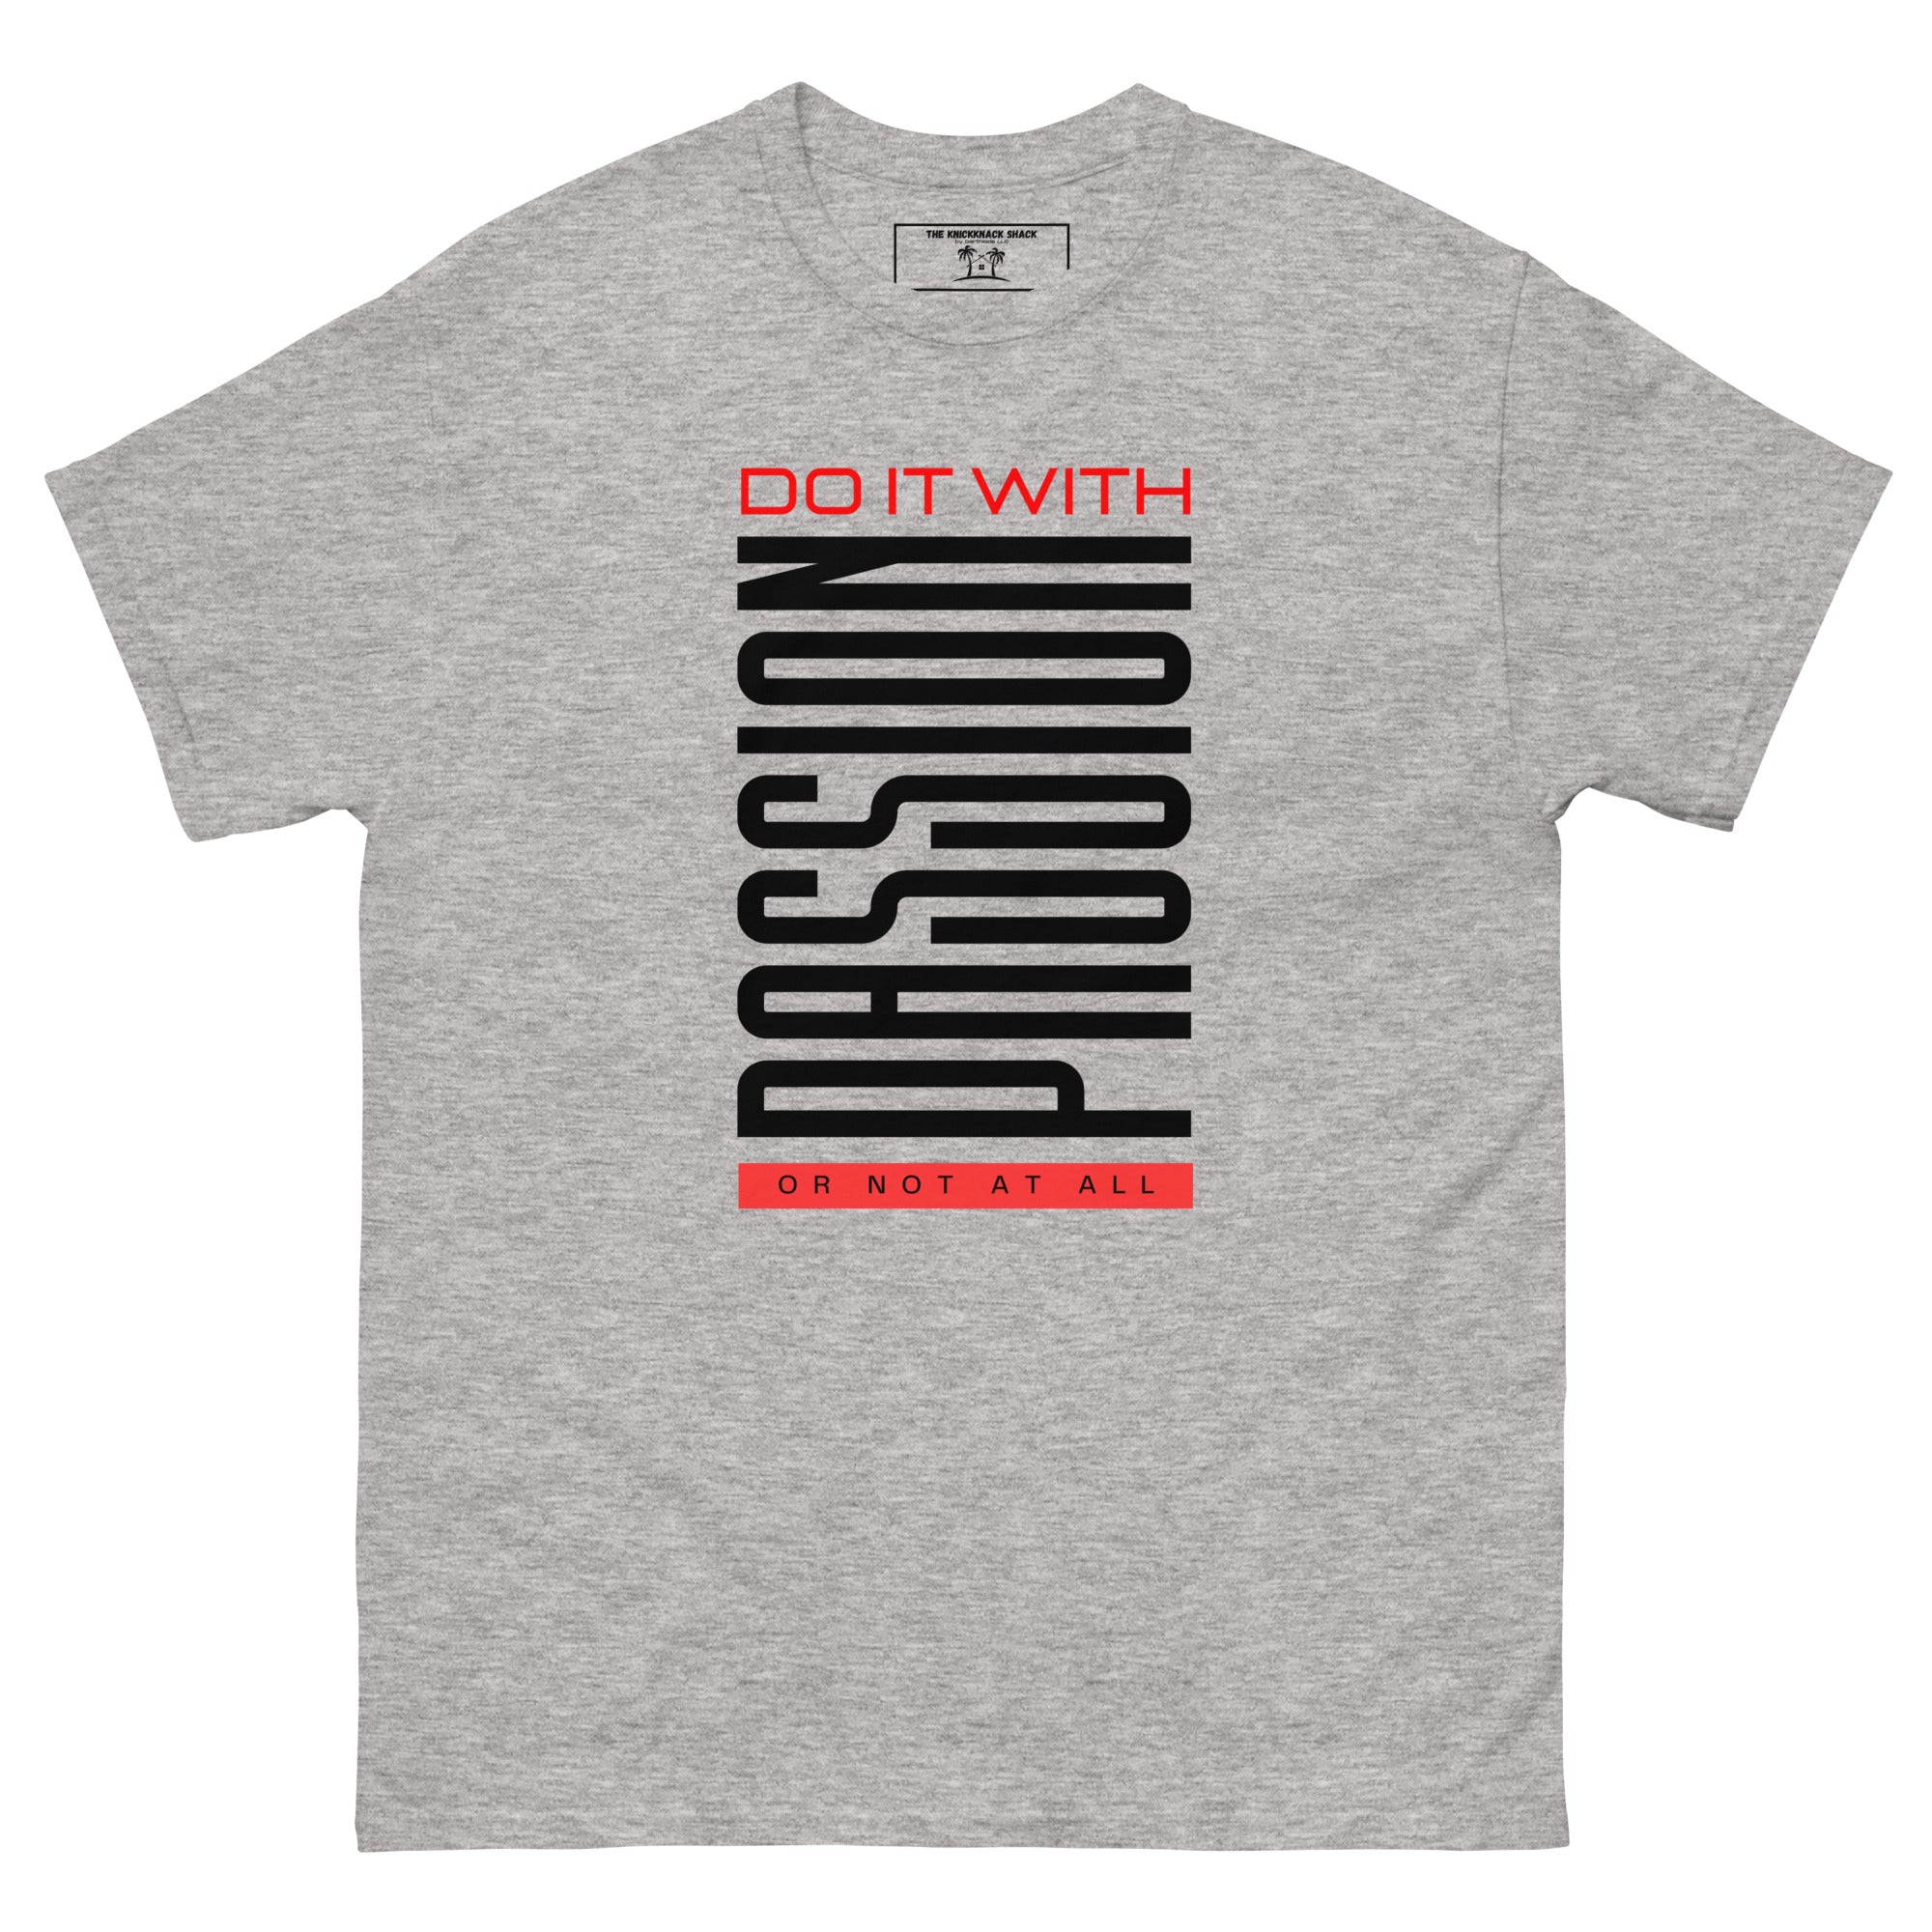 Classic Tee - Do It With Passion (Light Colors)